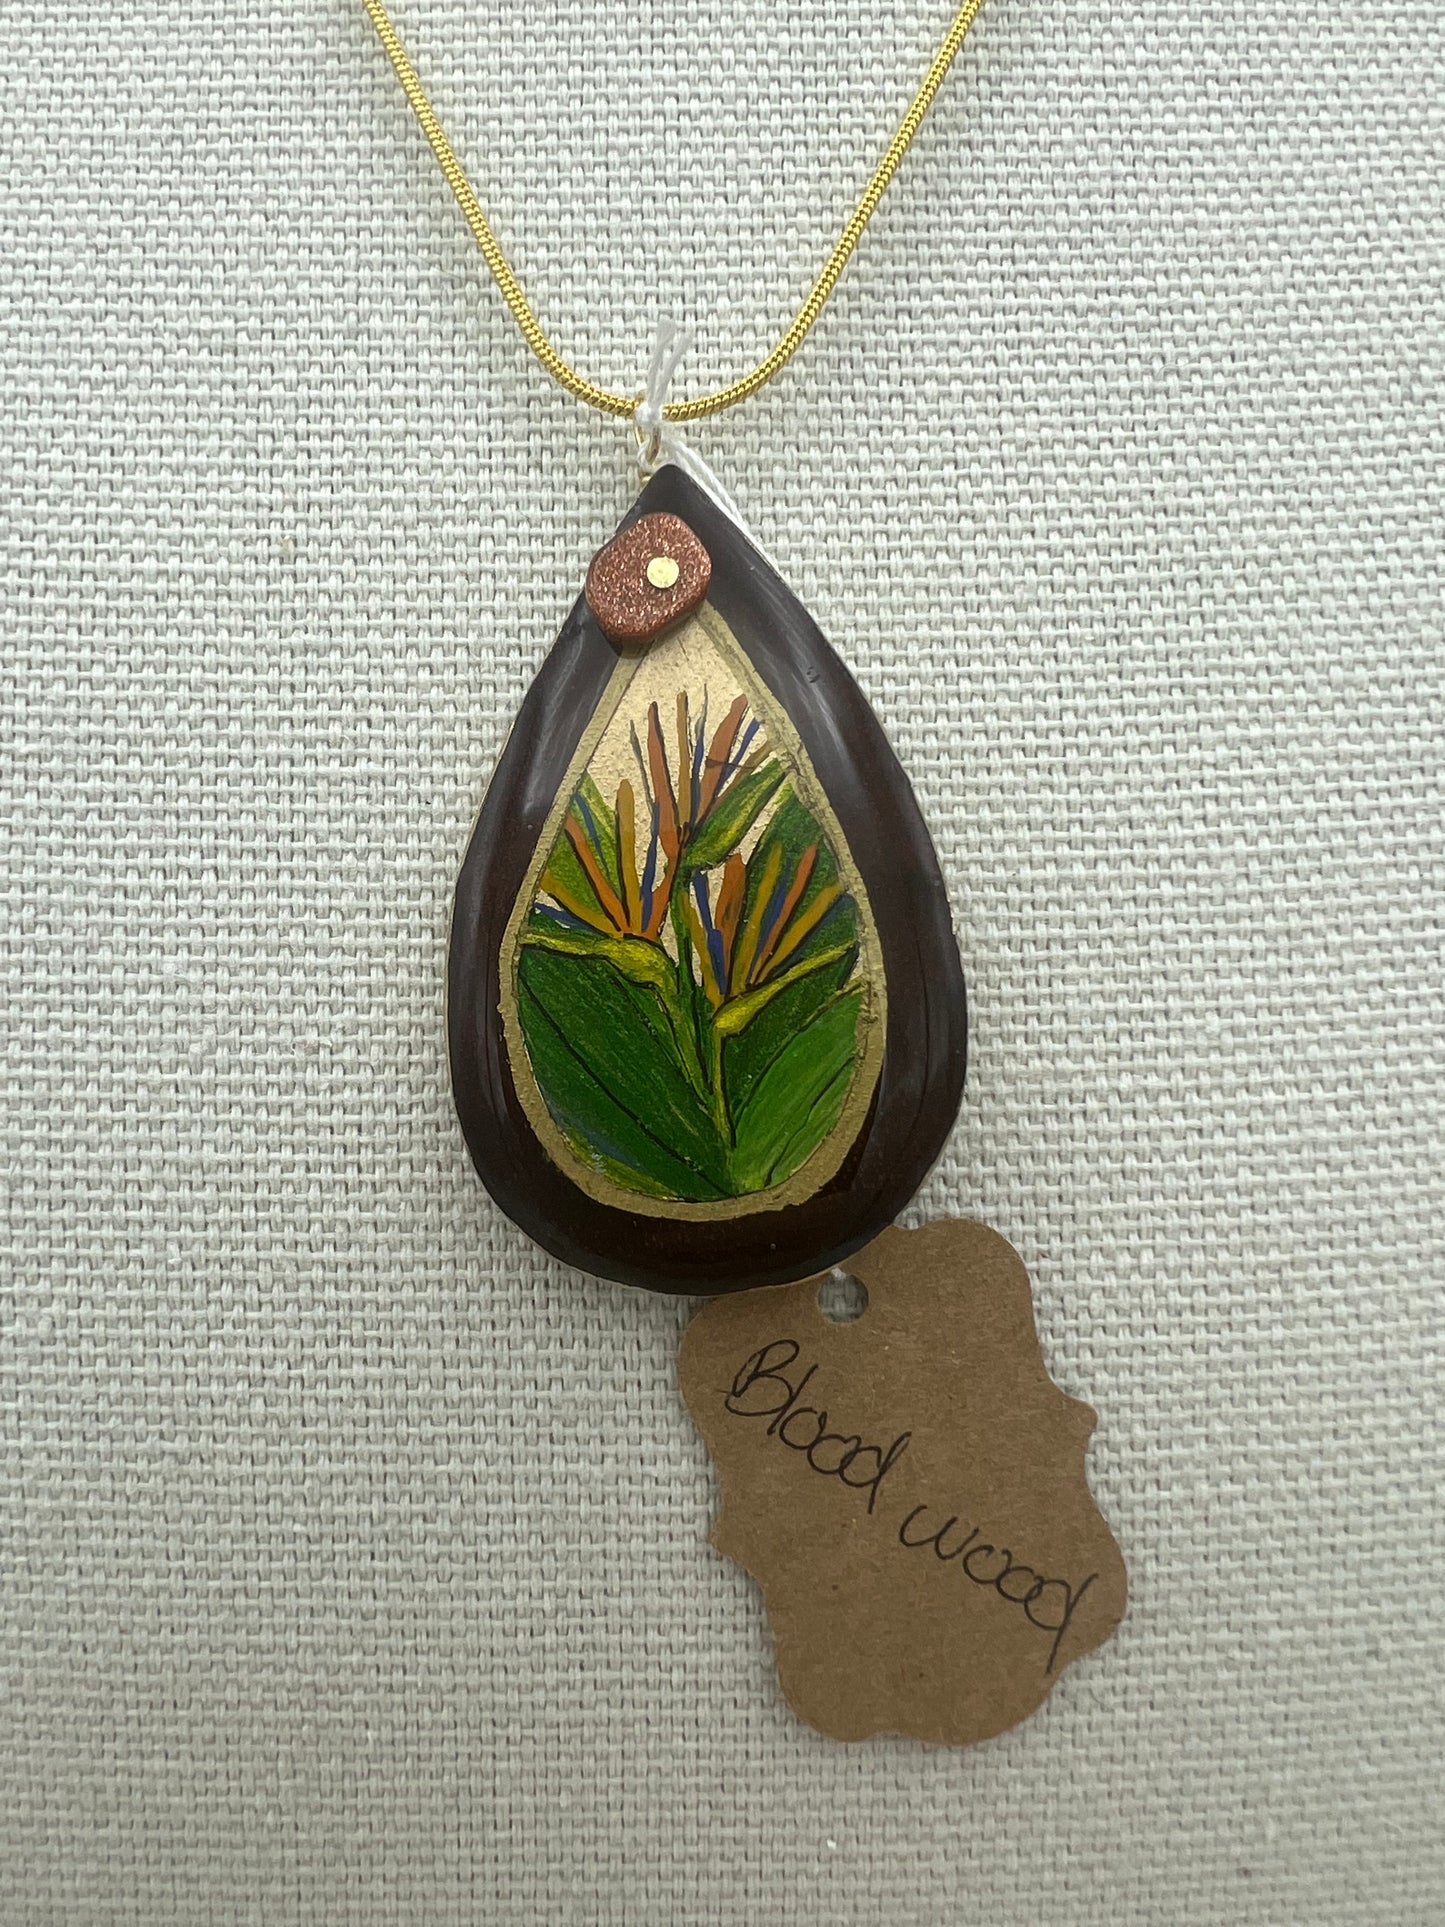 Birds of Paradise on Bloodwood - Wooden Pendant Necklace